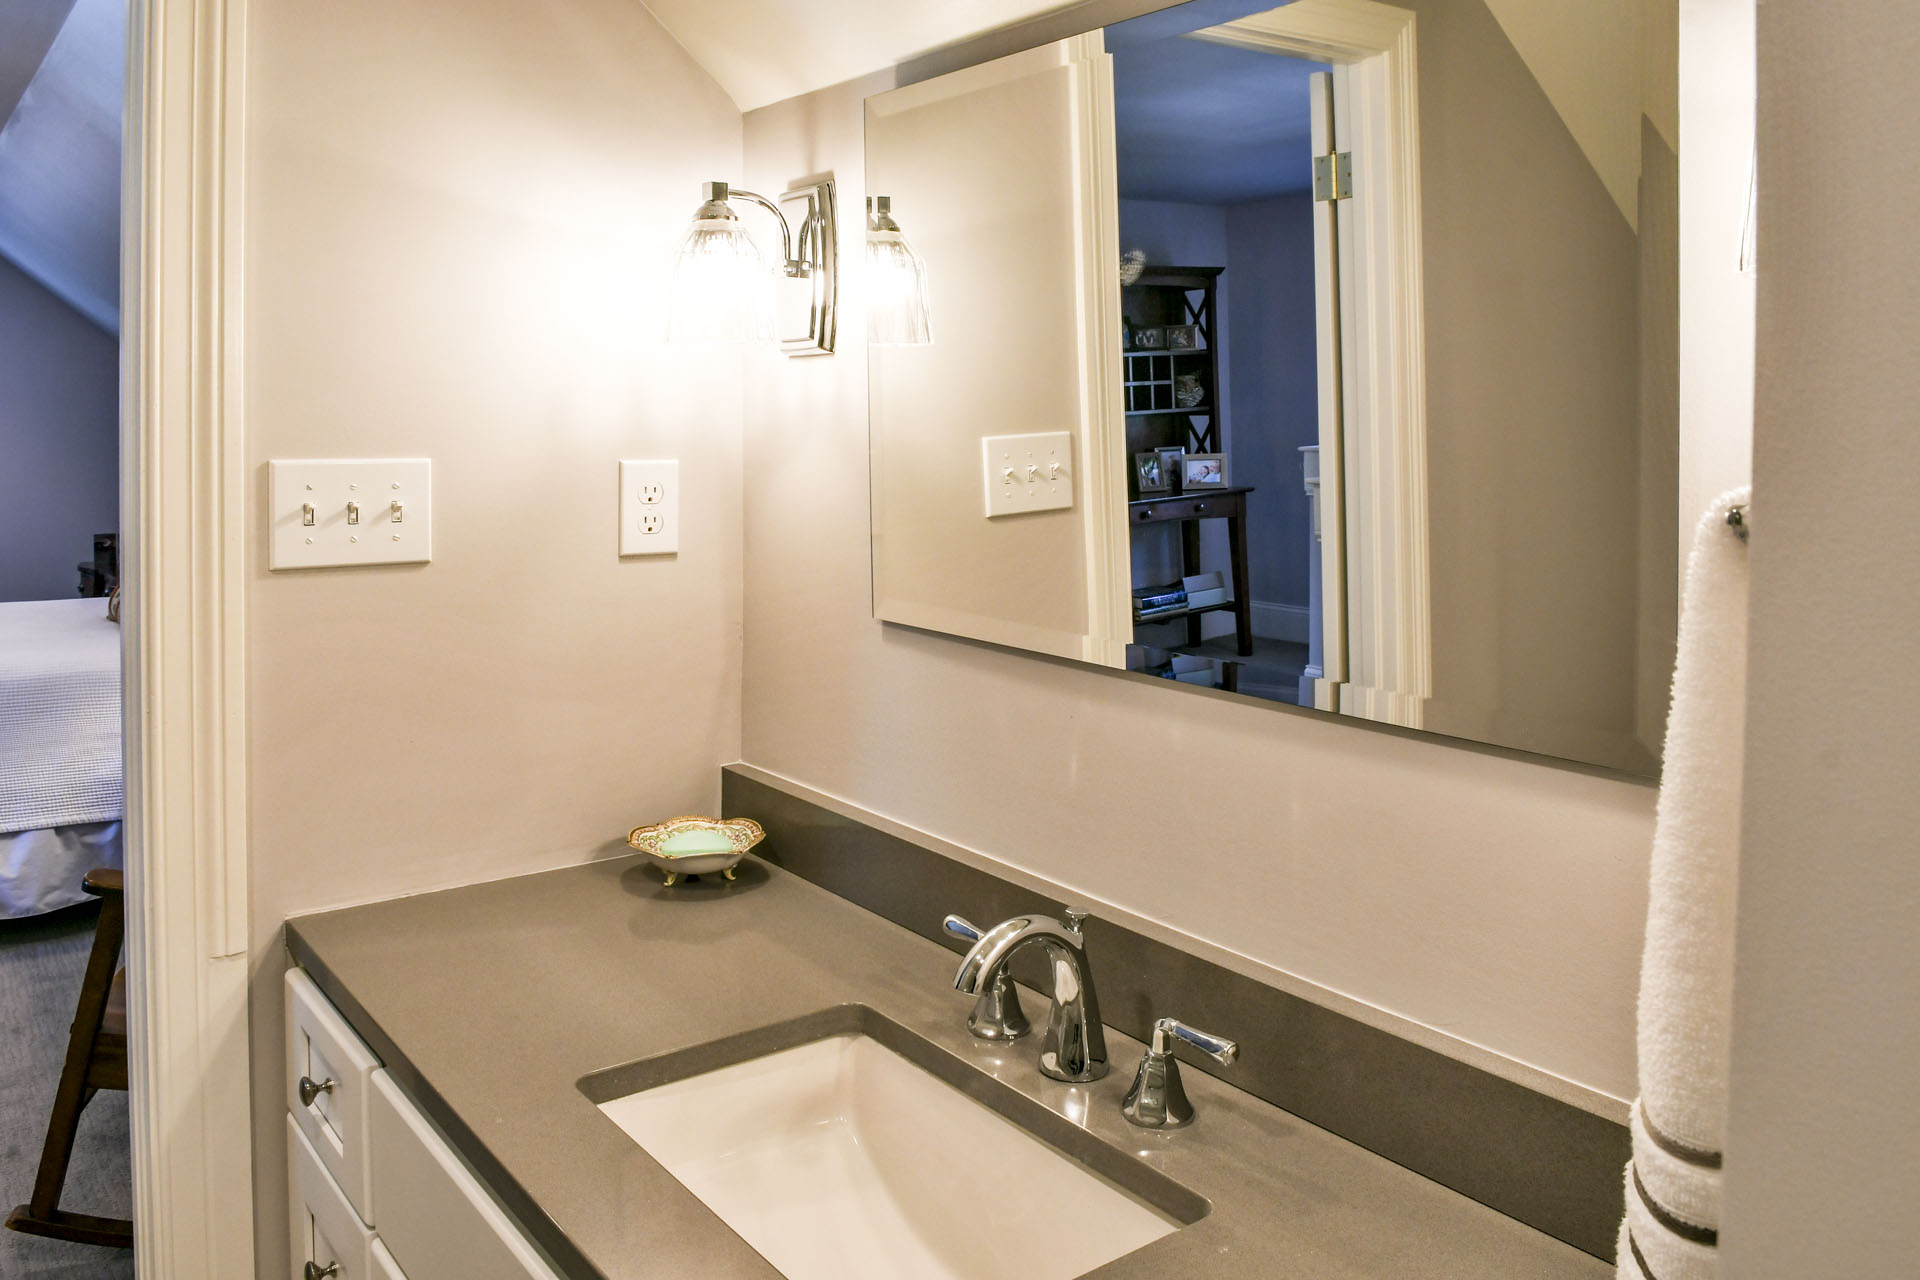 Louisville Kentucky Home Renovation, Louisville Kentucky Attic Renovation, Castlerock, Guest Suite, En Suite Bath, Sweet Retreat, Bedroom, Bathroom Addition, En Suite Bathroom, Sitting Area, Gray Wall Color, Antique Furniture, Built In Shelving, Gray Subway Tile, Chrome Finishes, White Built In Shelving, Granite Vanity Top, White Vanity, Vanity Lighting, Glassed In Shower, Hinged Door Shower, Large Shower, Marble Tile Flooring, Stairway, Before and After